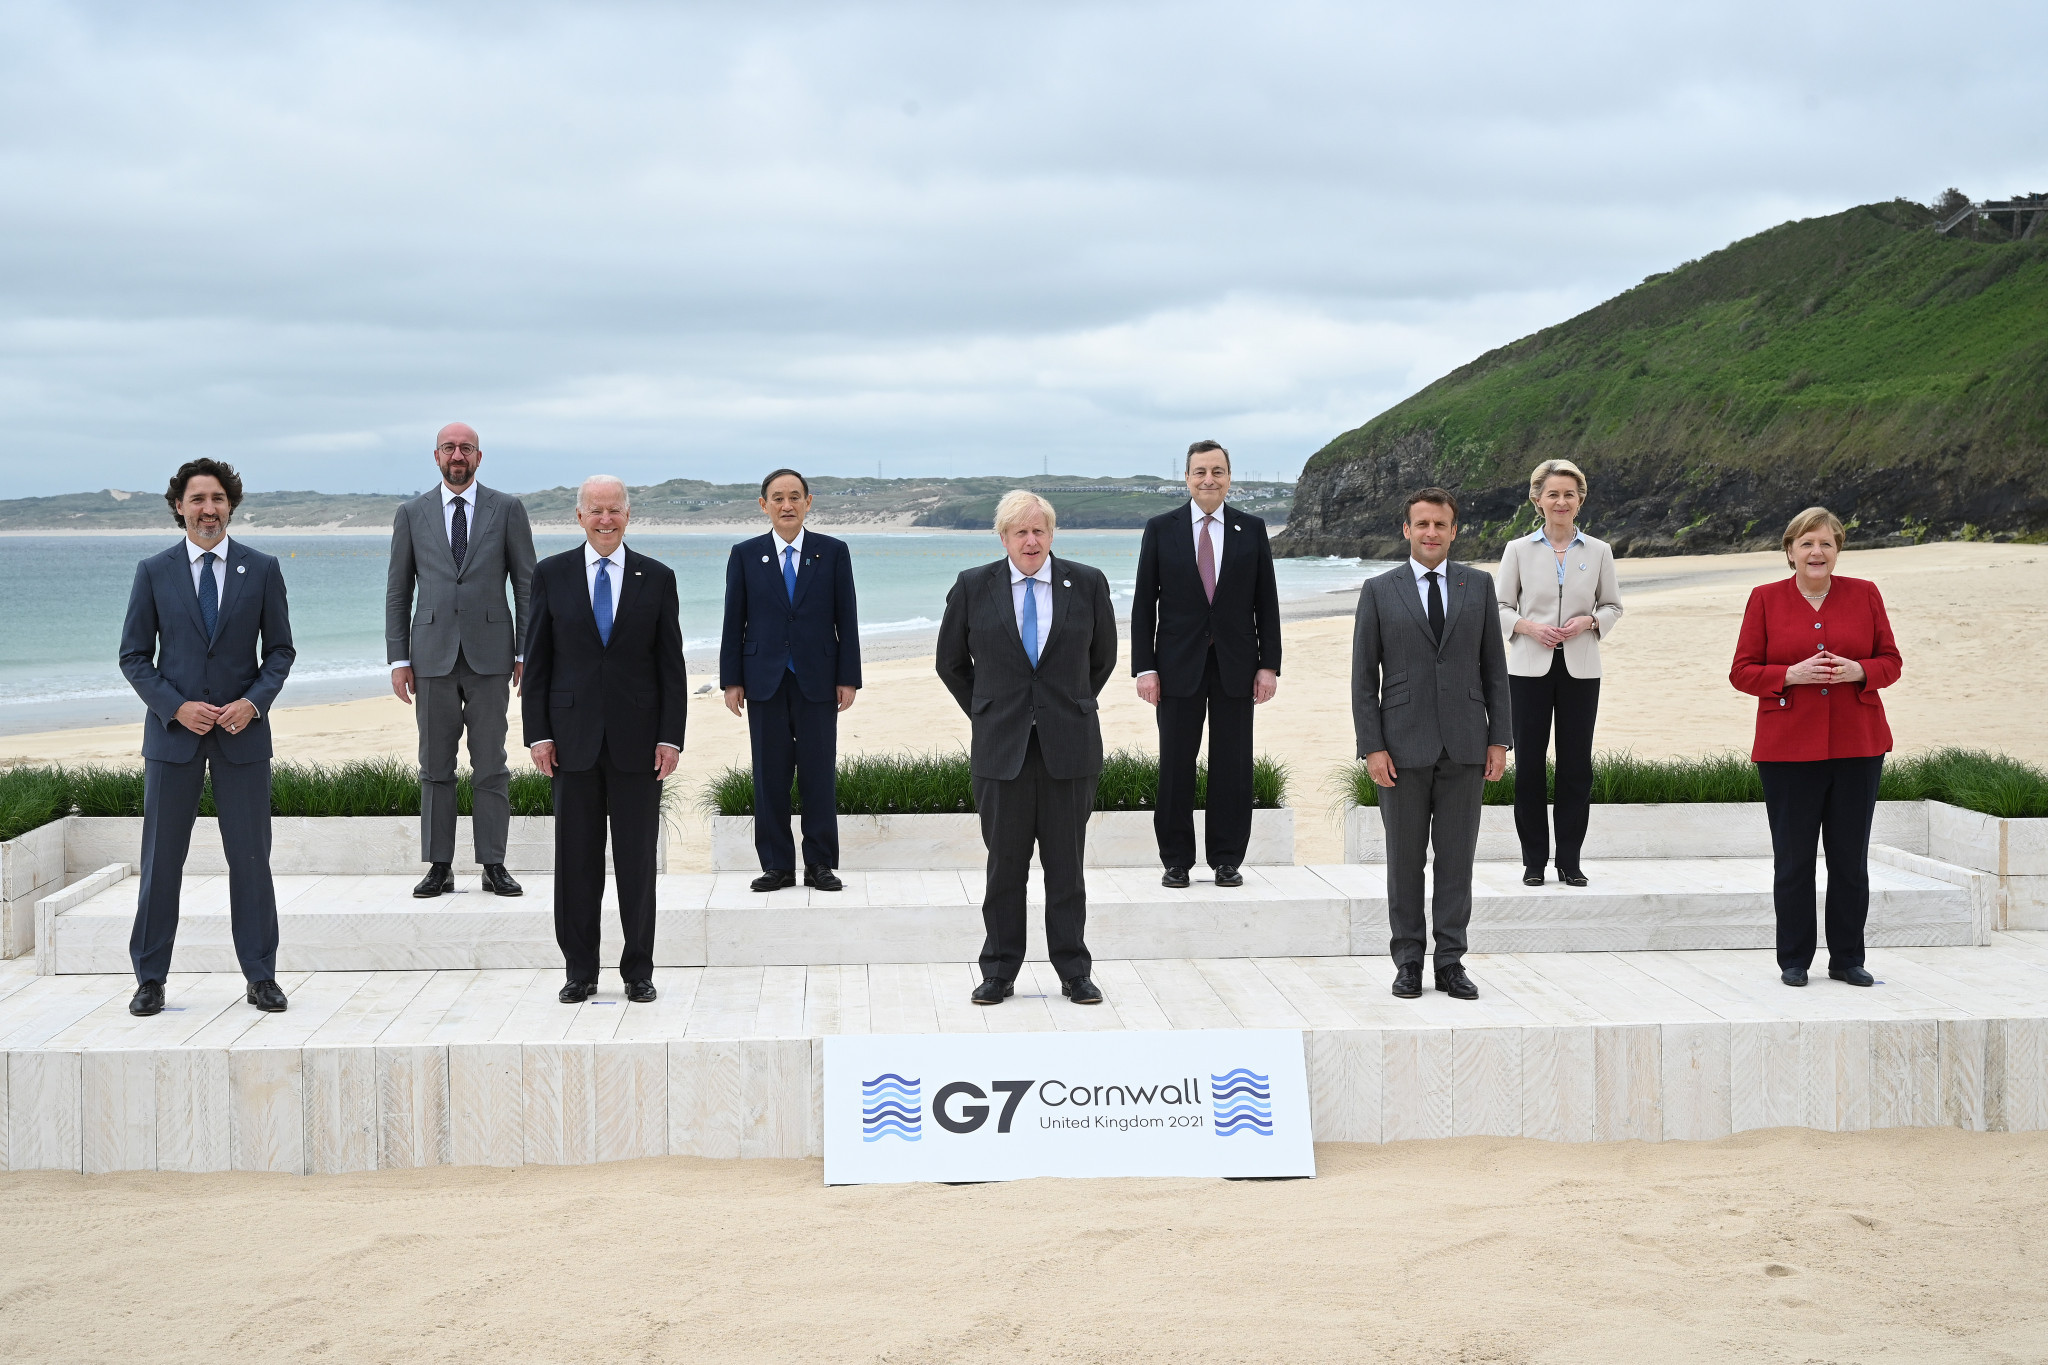 G7 leaders - pictured with leading European Union officials - have reiterated "our support for the holding of the Olympic and Paralympic Games Tokyo 2020 in a safe and secure manner" ©Getty Images